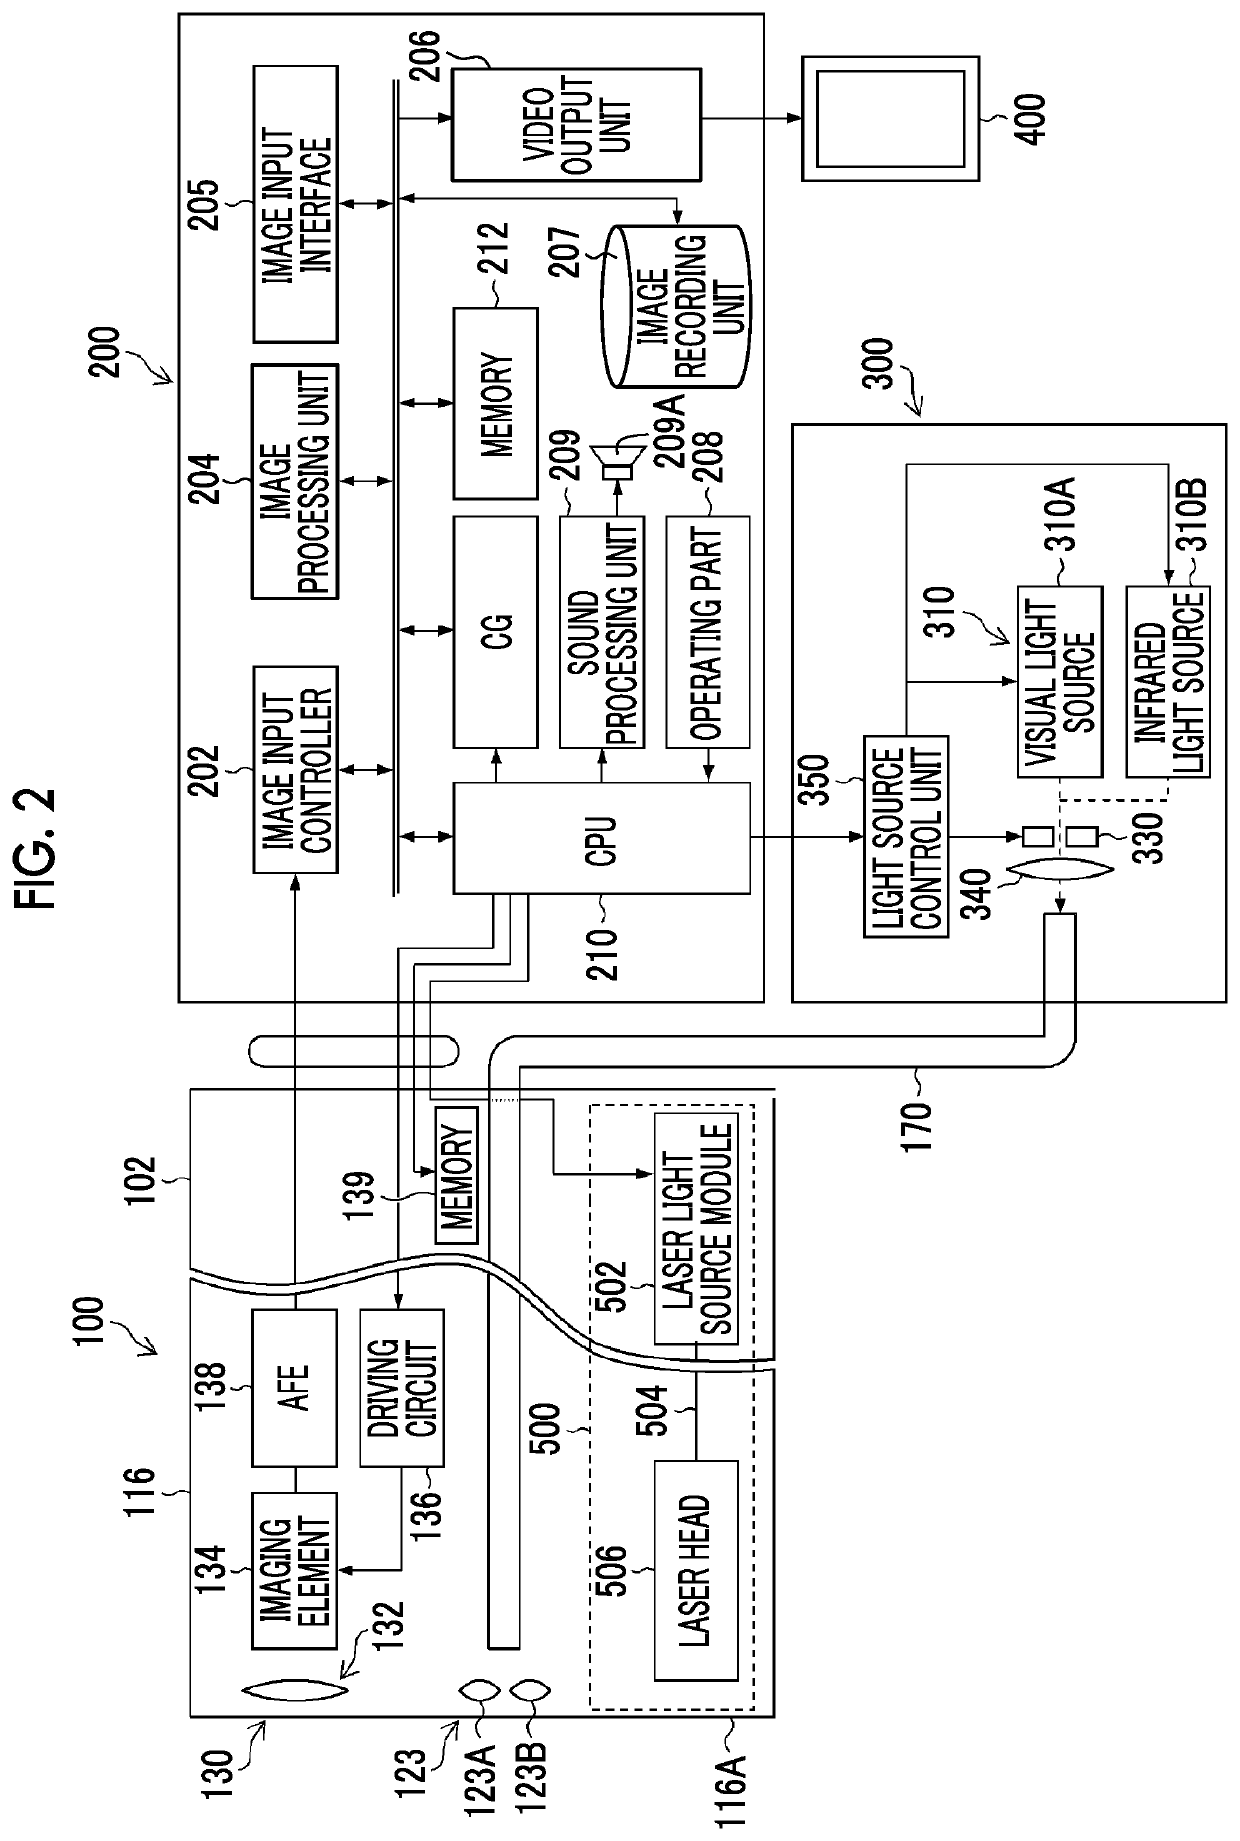 Measurement support device, endoscope system, and processor